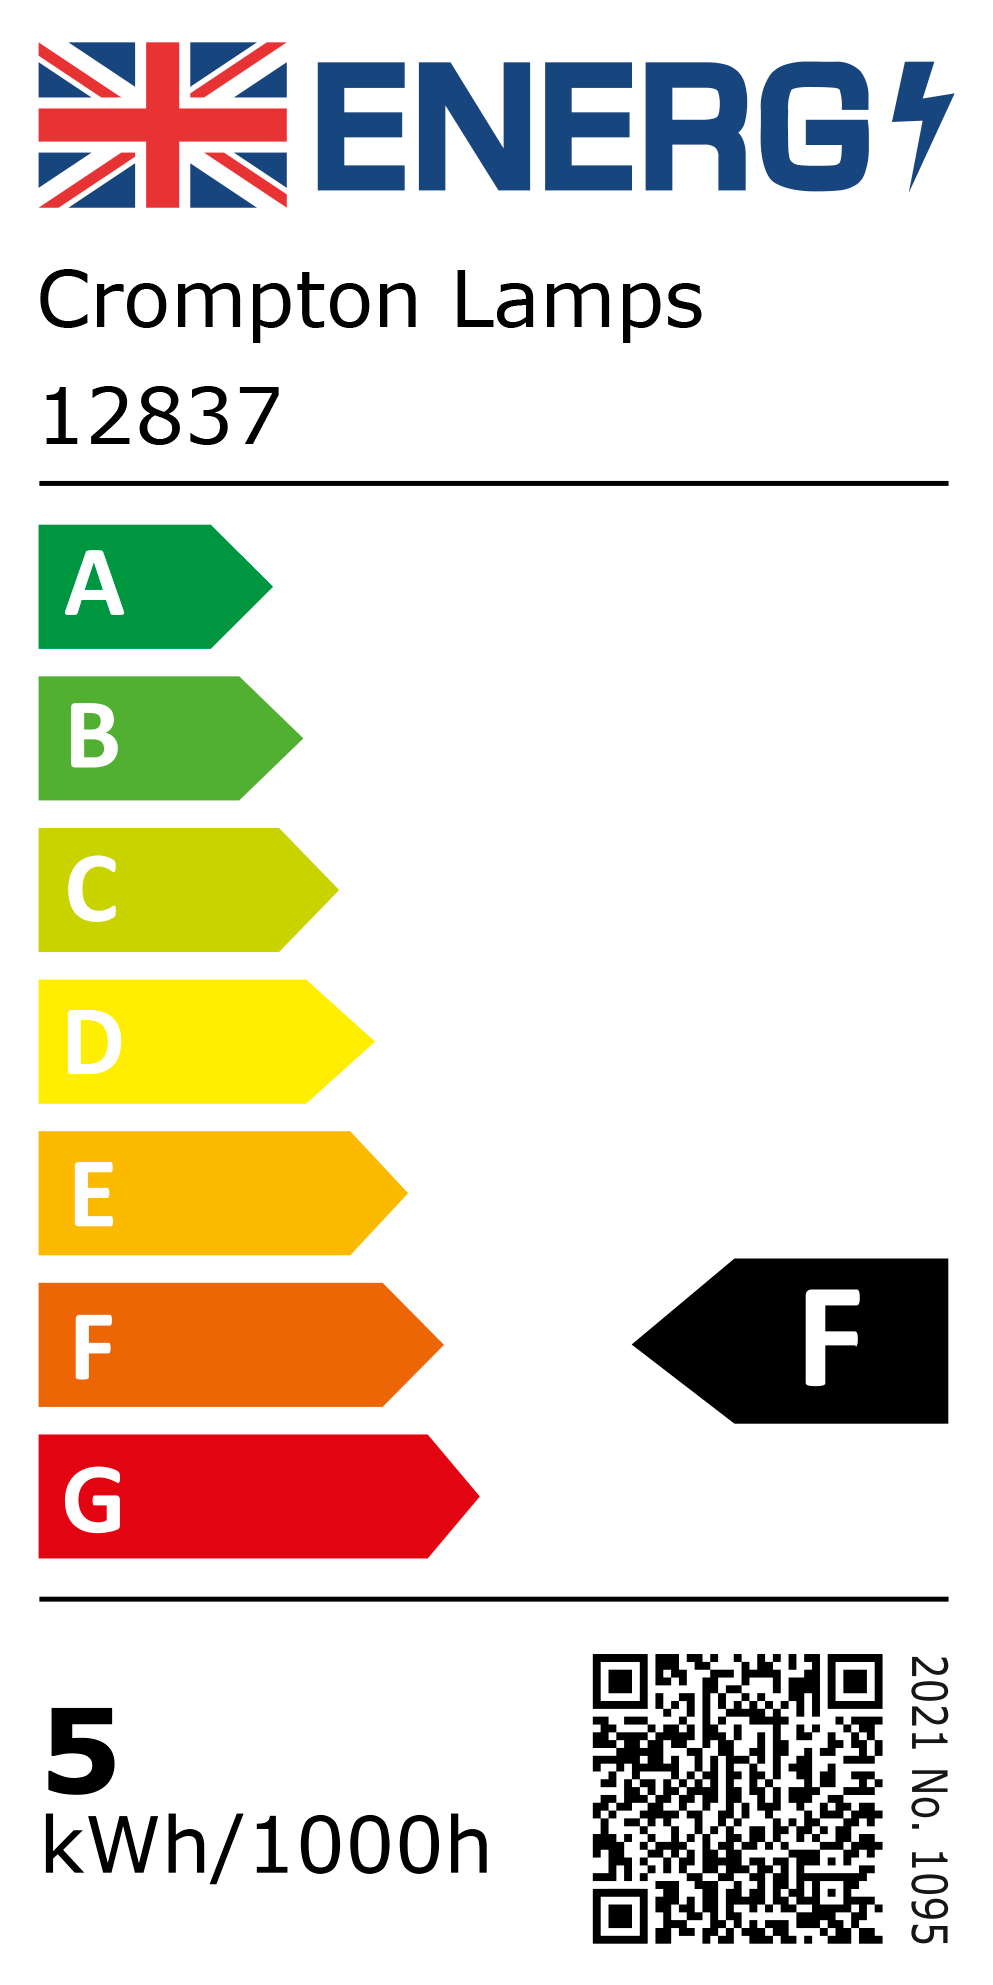 New 2021 Energy Rating Label: MPN 12837